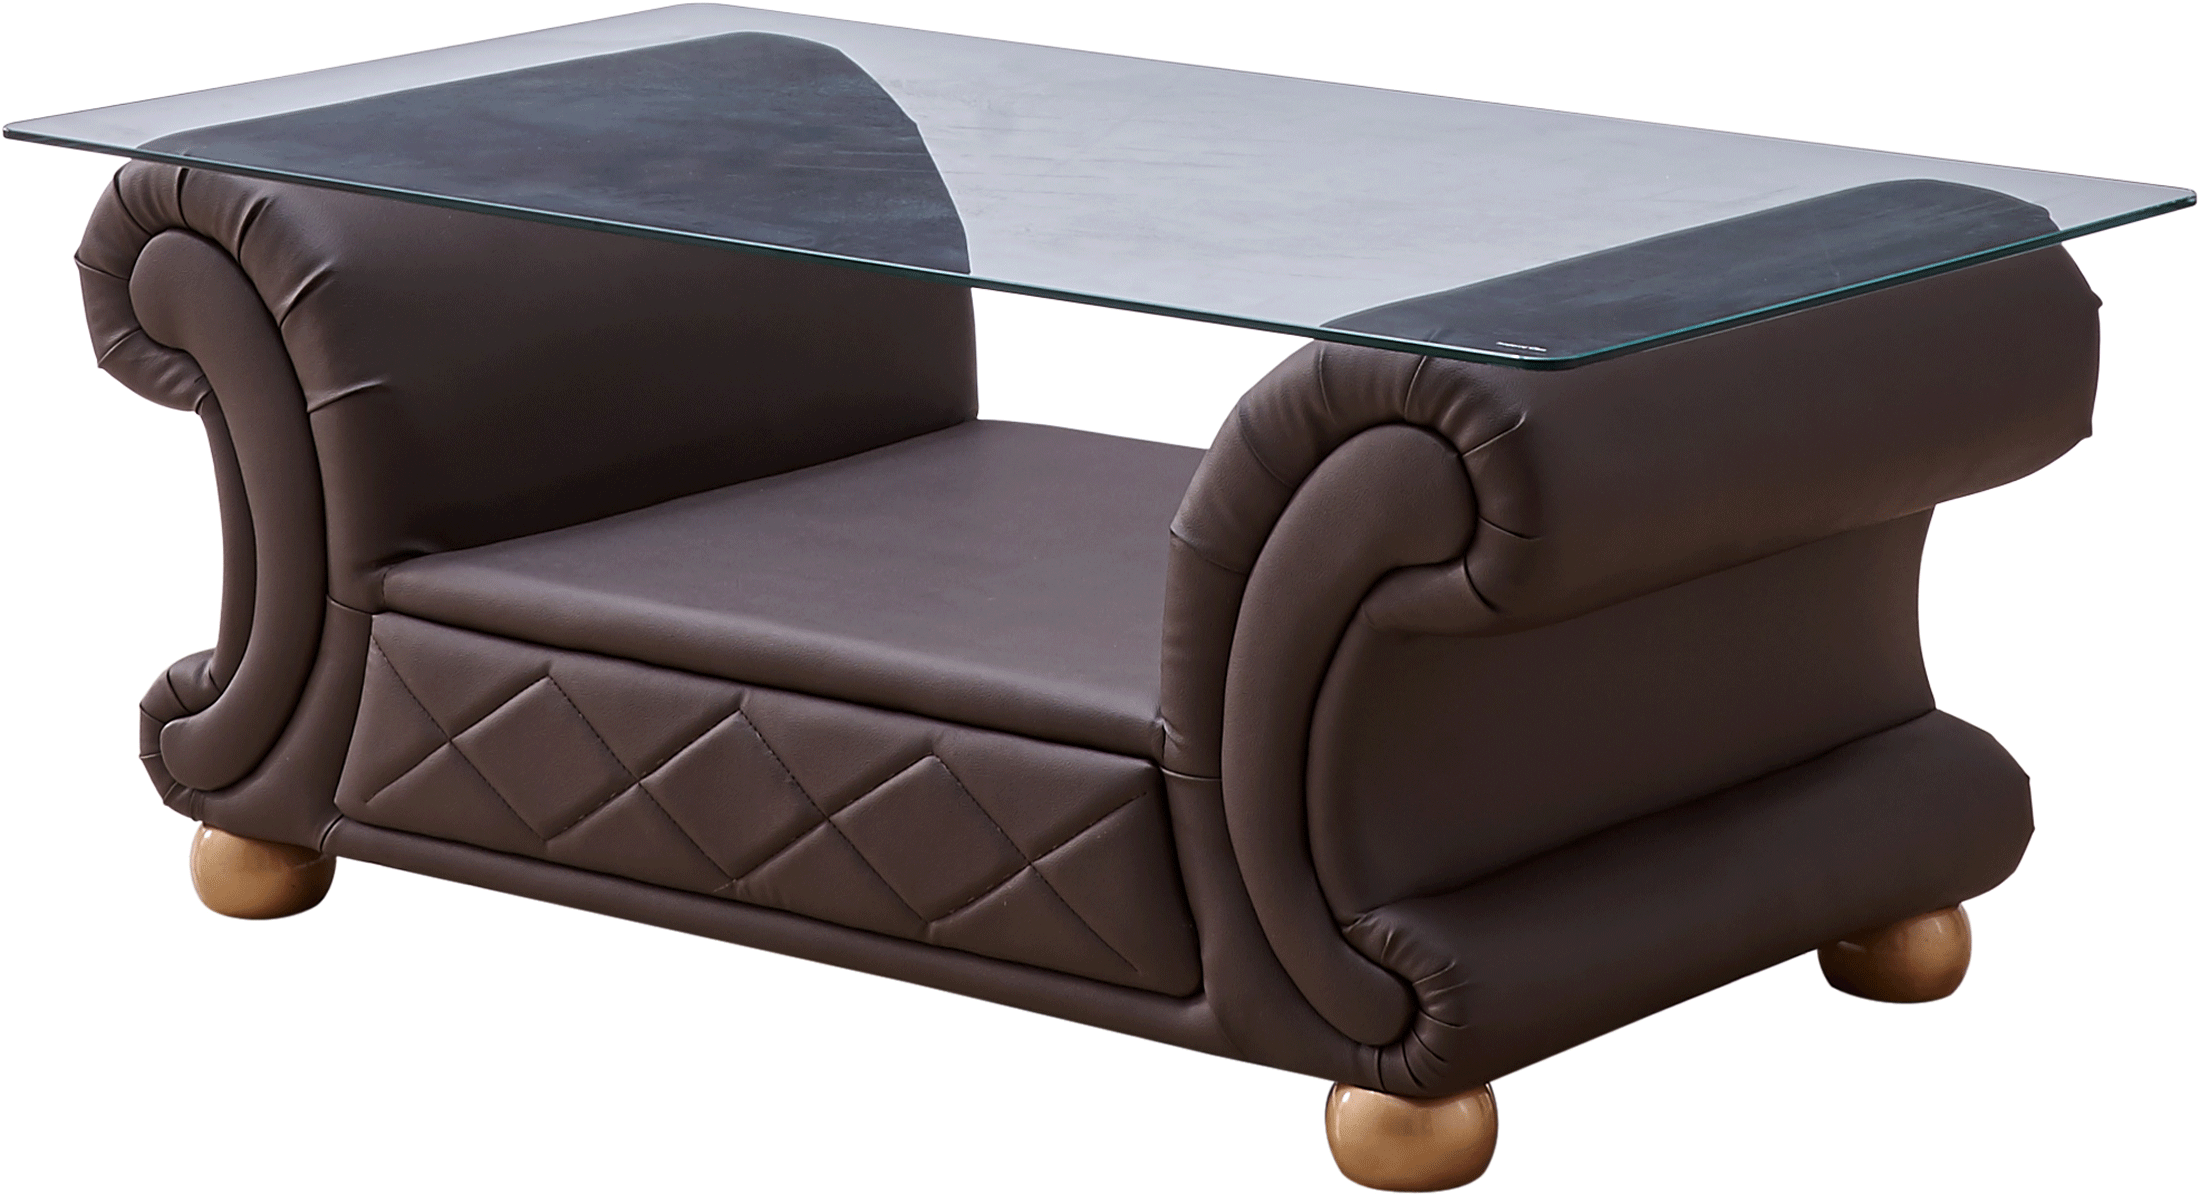 Brands Camel Classic Living Rooms, Italy Apolo Brown Coffee table